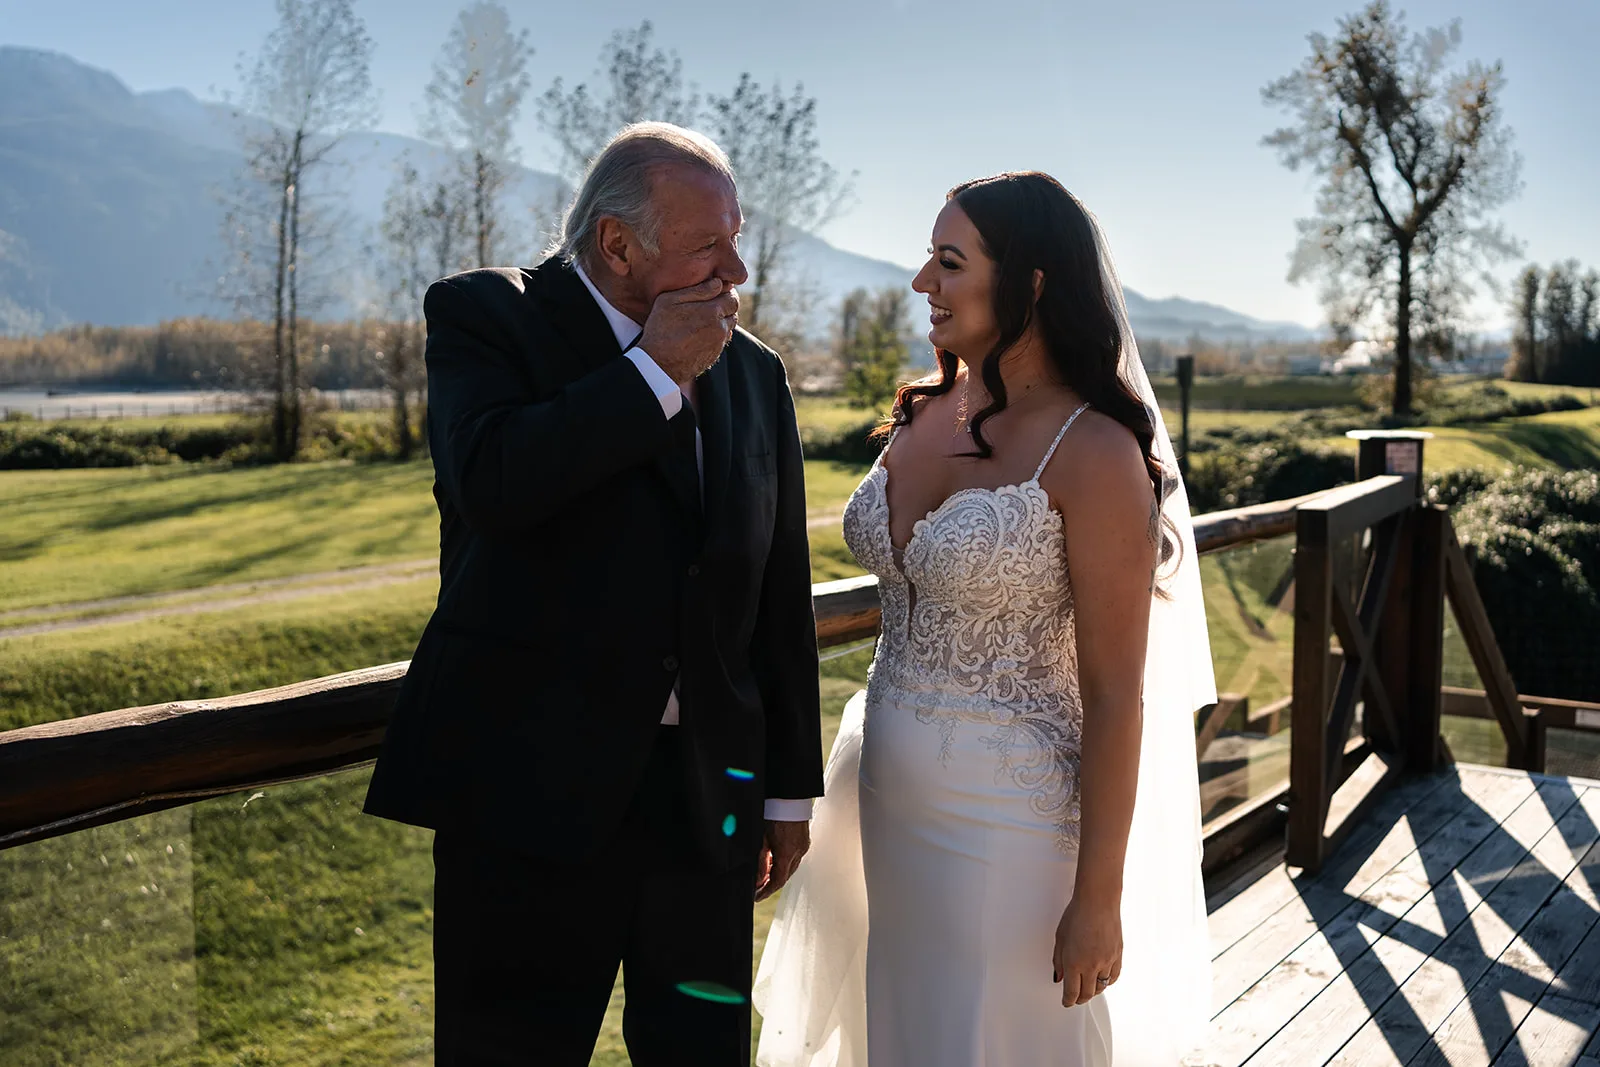 Father doing a first look with his daughter on her wedding day, Megan and Claire's wedding, by Kaitlin Day Photography